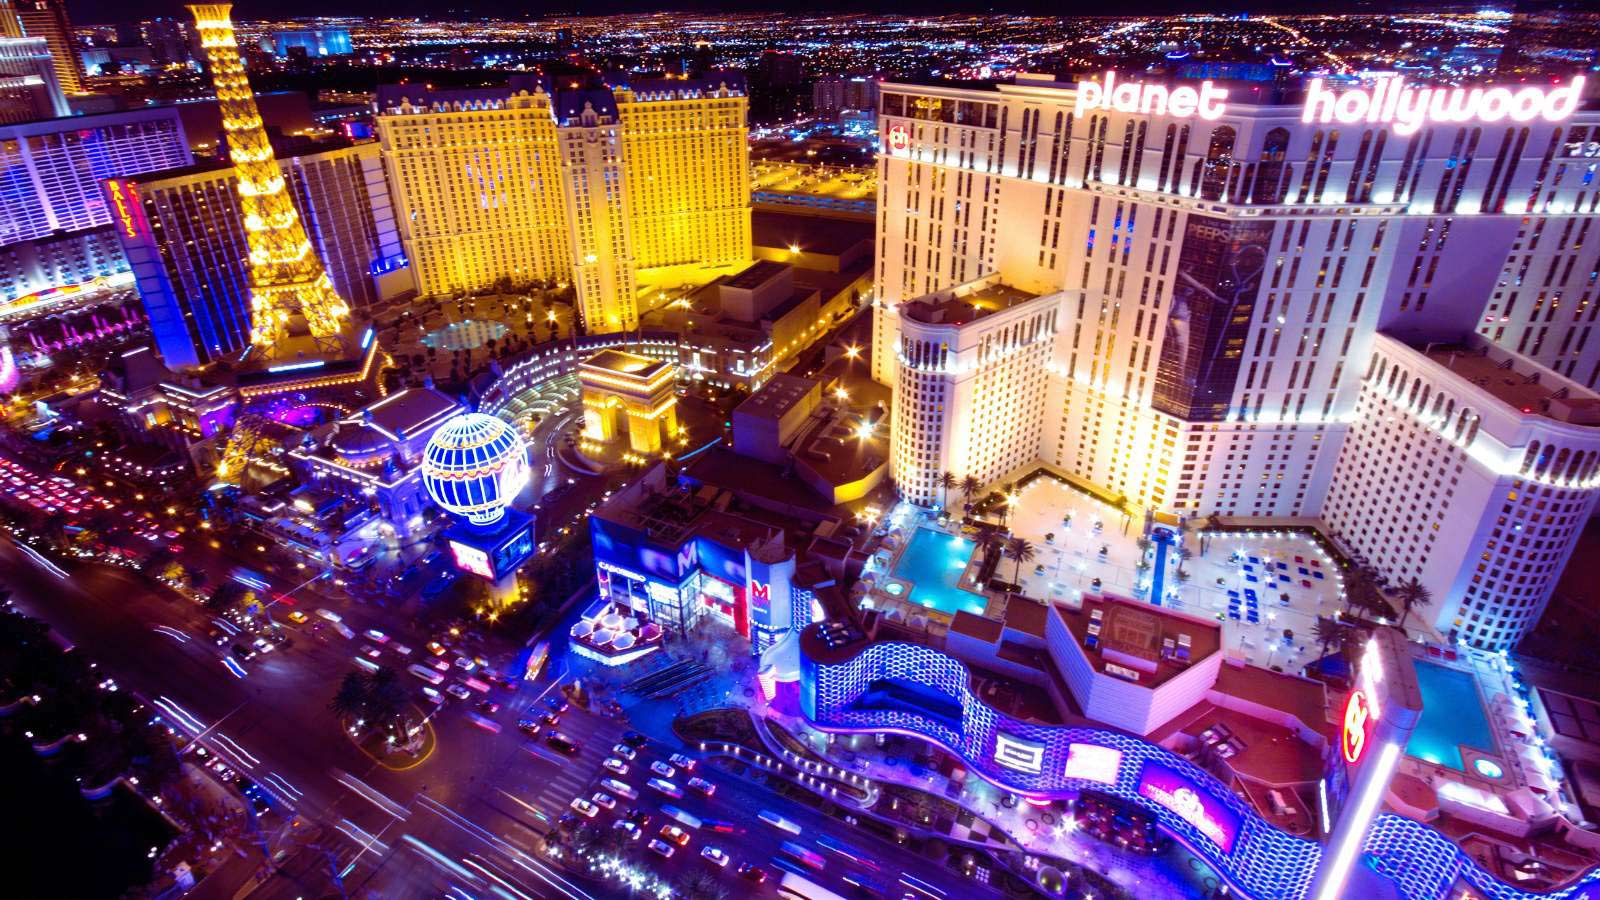 <p>It’s hard to go through life without visiting Las Vegas at least once. Known for its gambling and shows, Las Vegas now offers so much more than just those activities. There are many great shows and activities to enjoy, making it a fun town for all ages.</p>